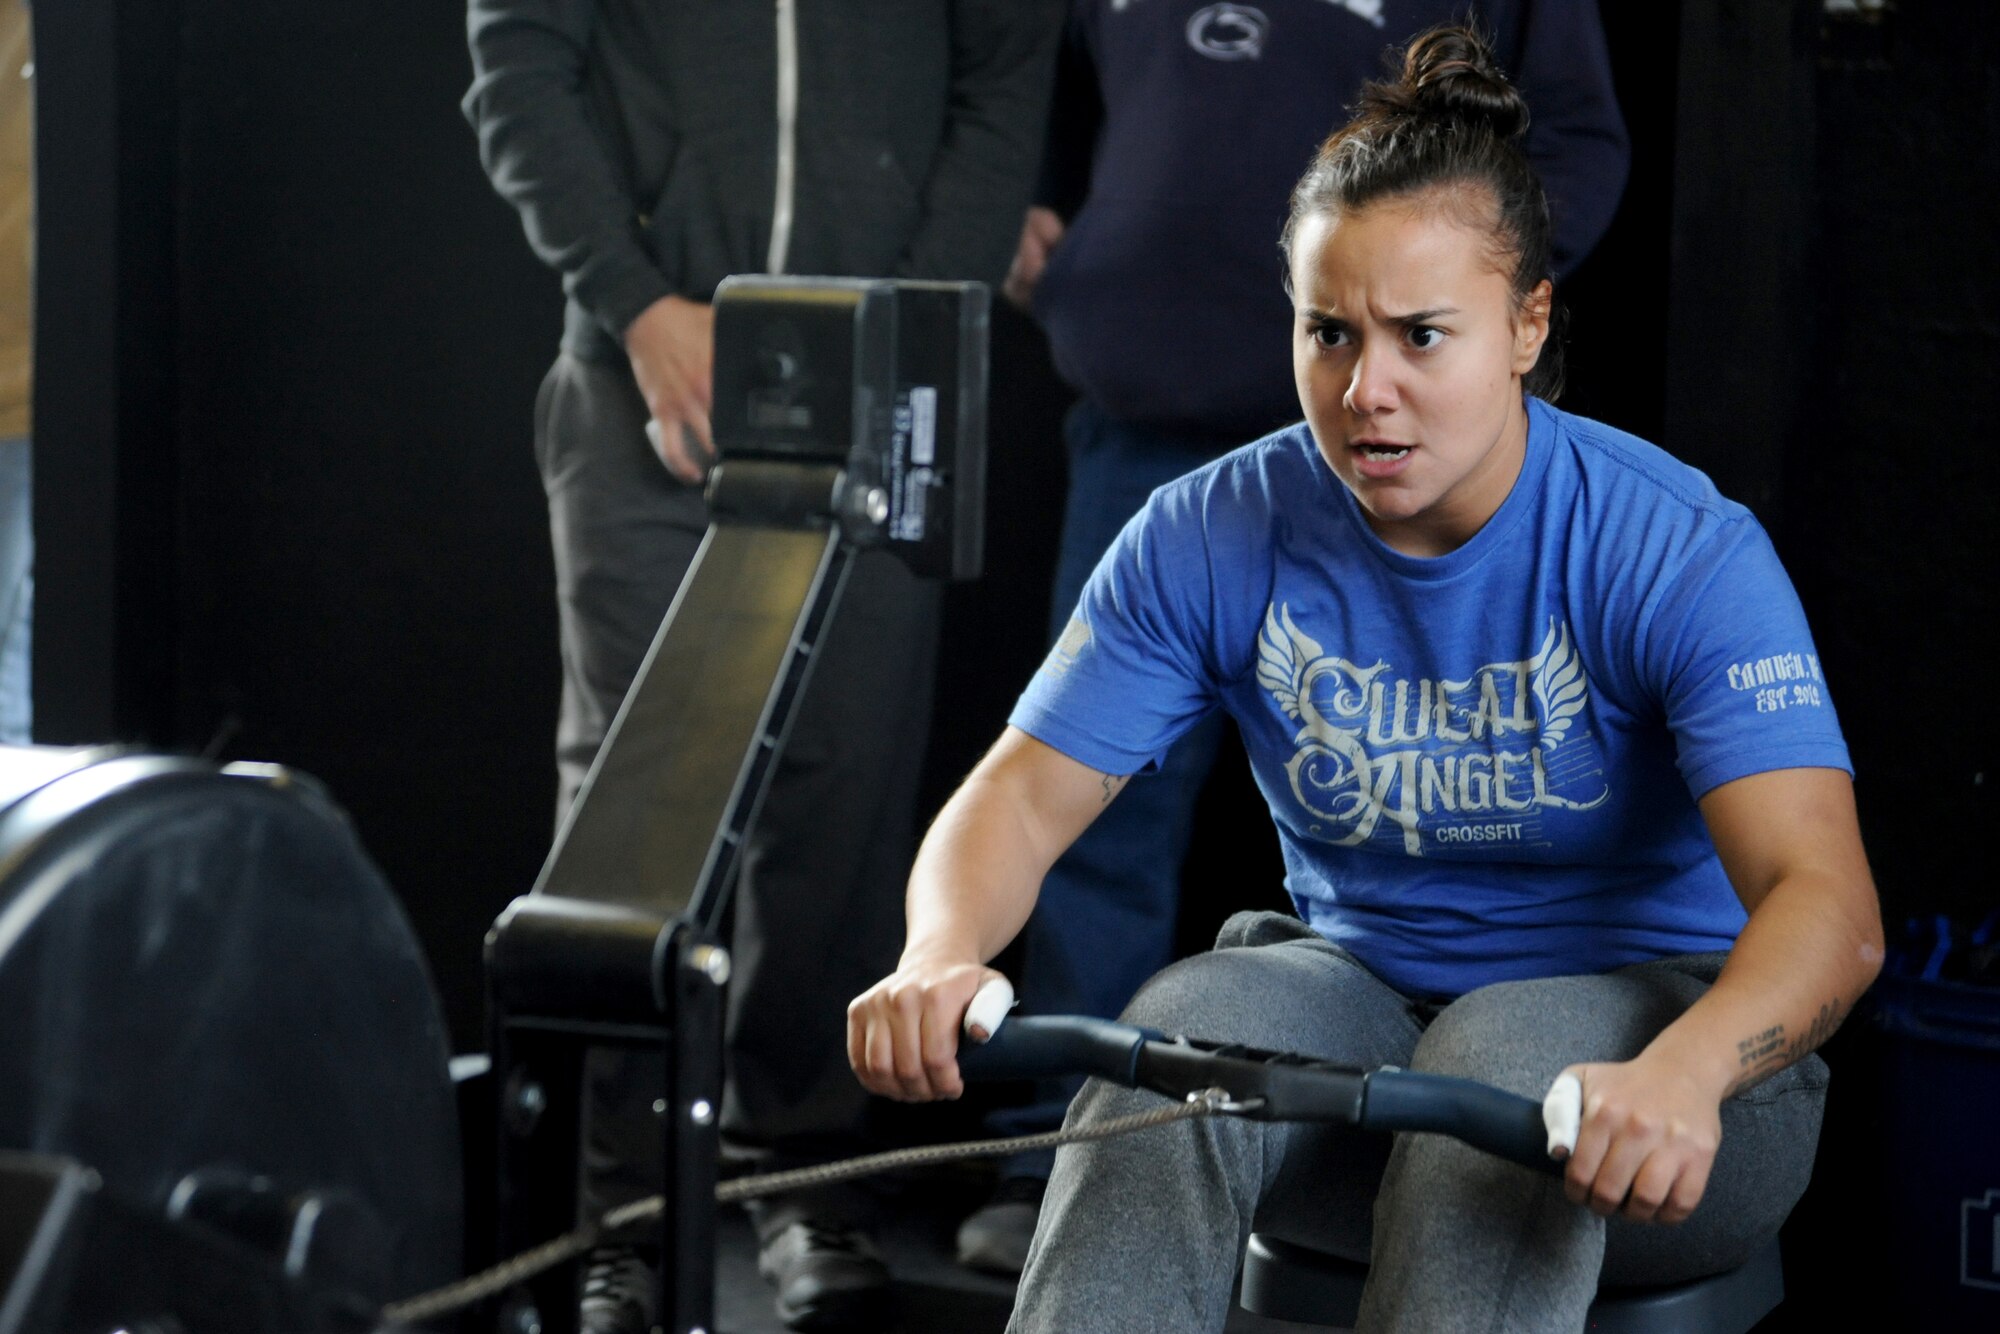 Airman 1st Class Karla Montes, 436th Dental Squadron dental assistant, performs rows during the team portion of the Eastern Shore Affiliate Challenge Oct. 17, 2015, in Georgetown, Del. Montes was selected to compete in the team challenge based on her individual scores throughout the competition. (U.S. Air Force photo/Staff Sgt. Elizabeth Morris)